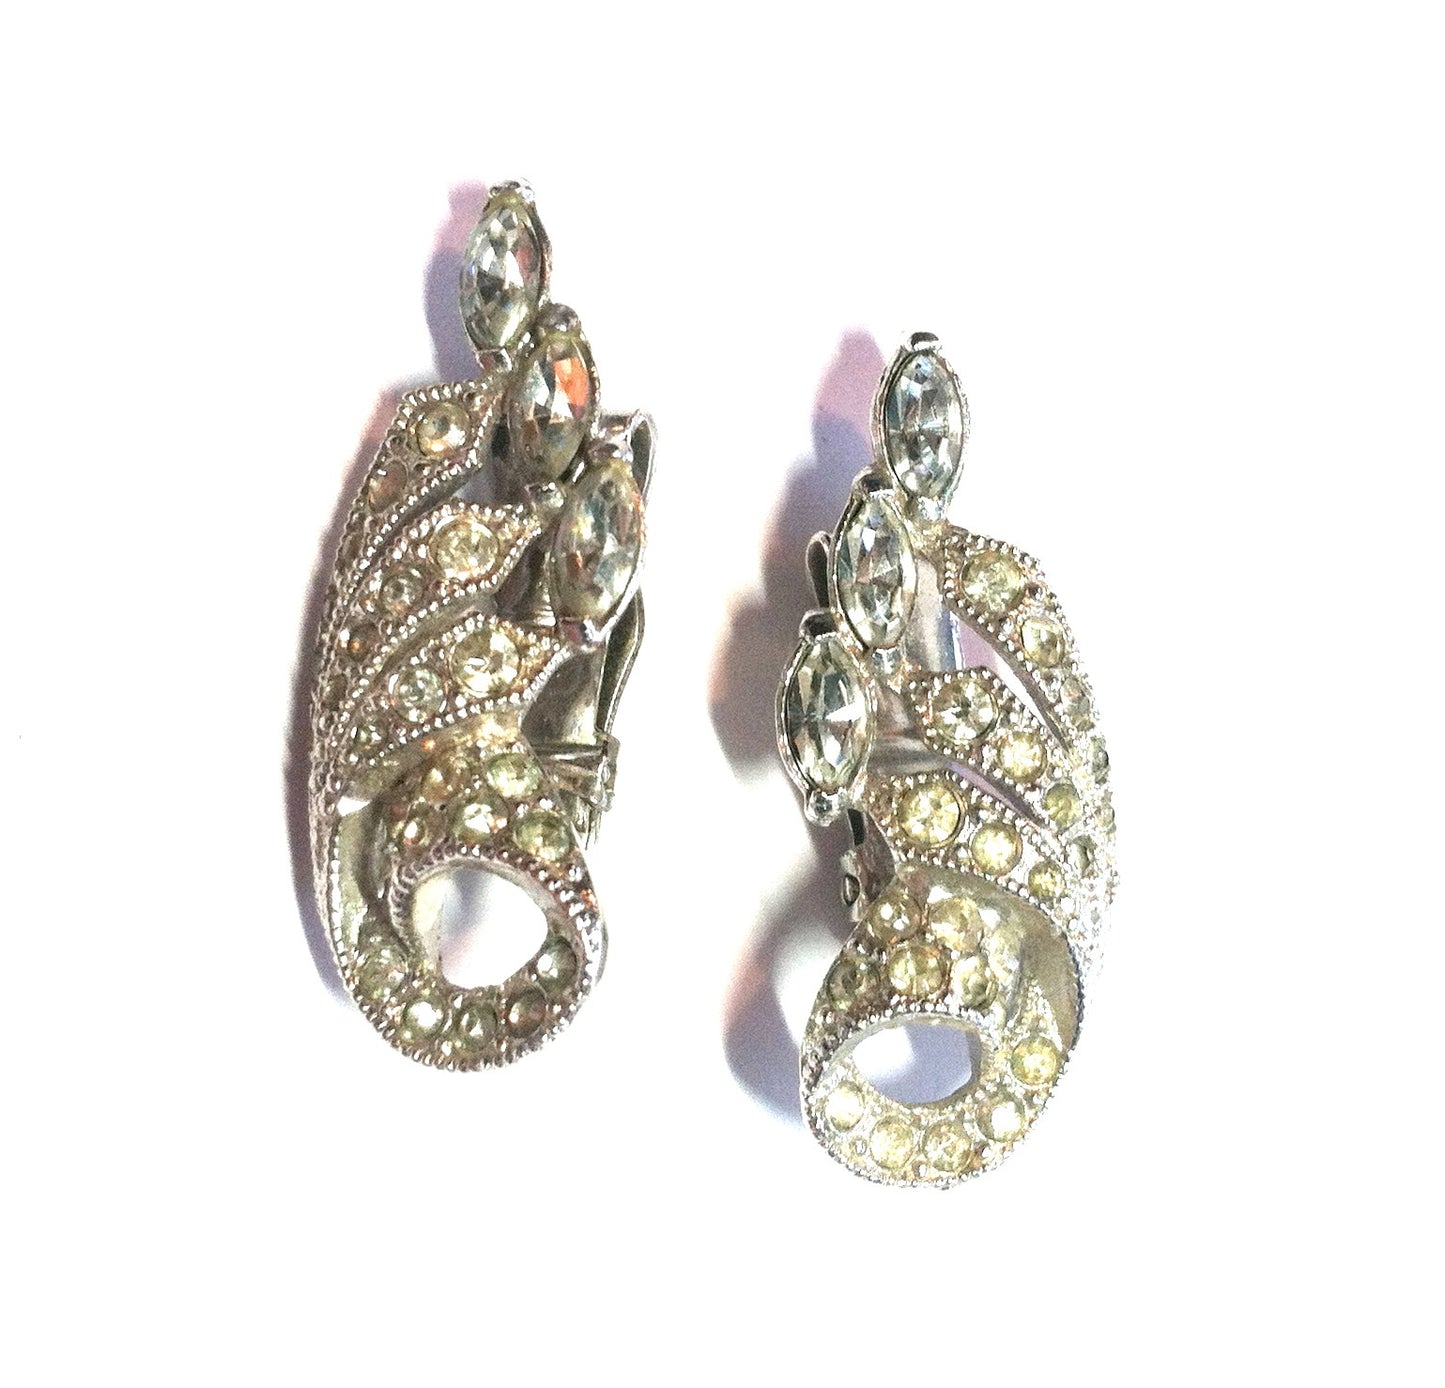 Graceful Curving Silver and Rhinestone Clip Earrings circa 1940s Dorothea's Closet Vintage Jewelry 